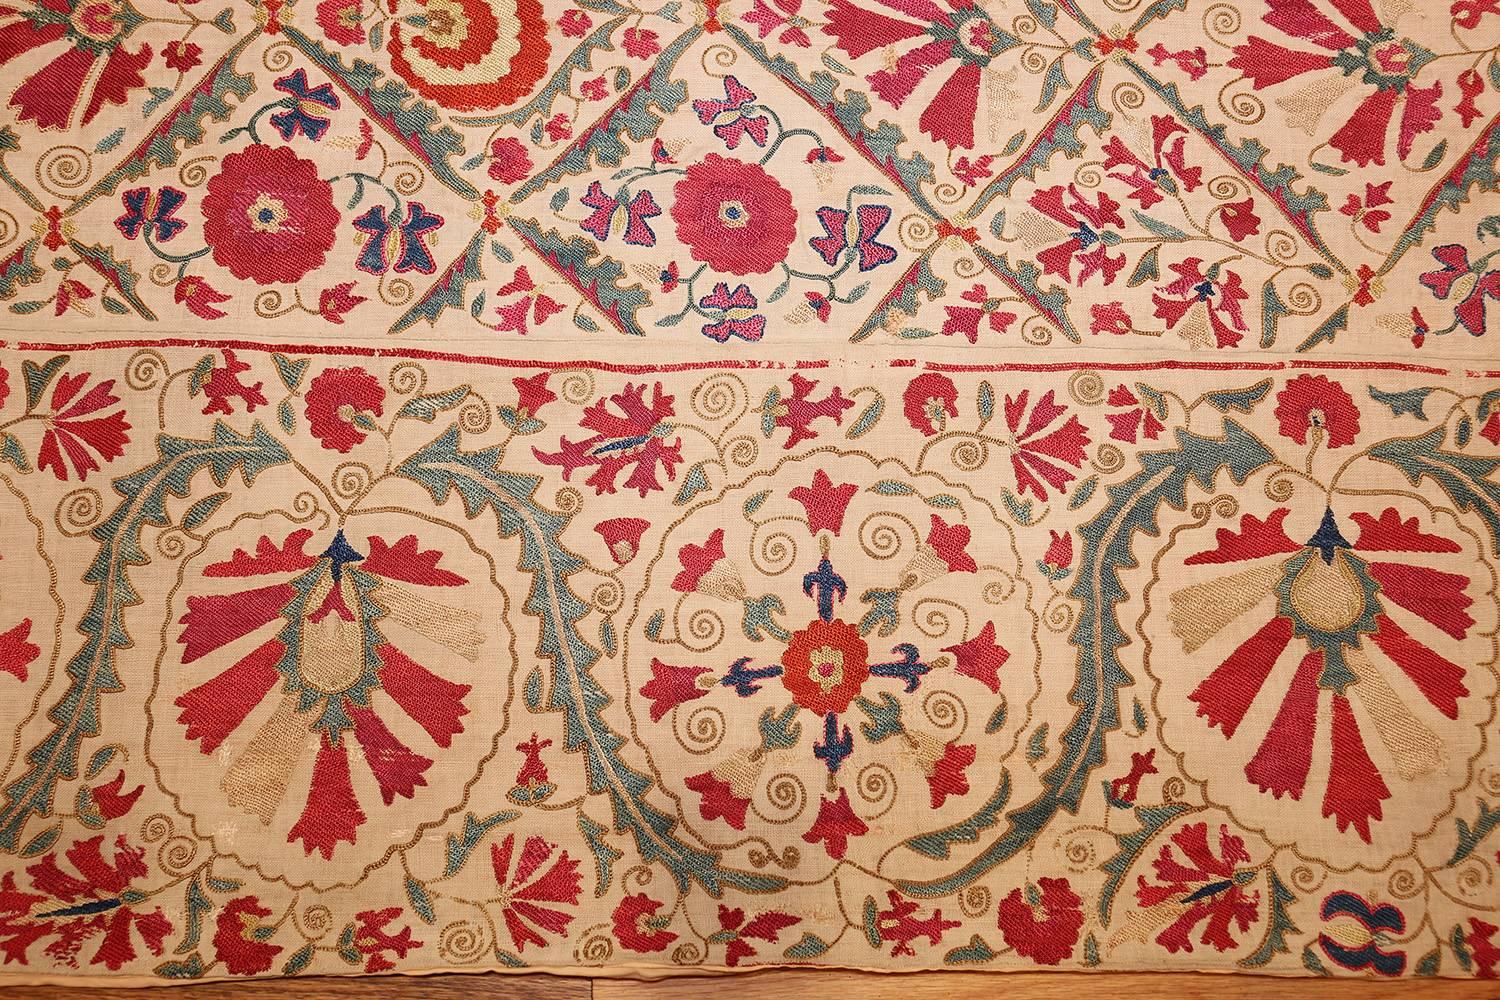 Early 19th Century Suzani Uzbek Textile. Size: 5 ft 4 in x 5 ft 7 in  3